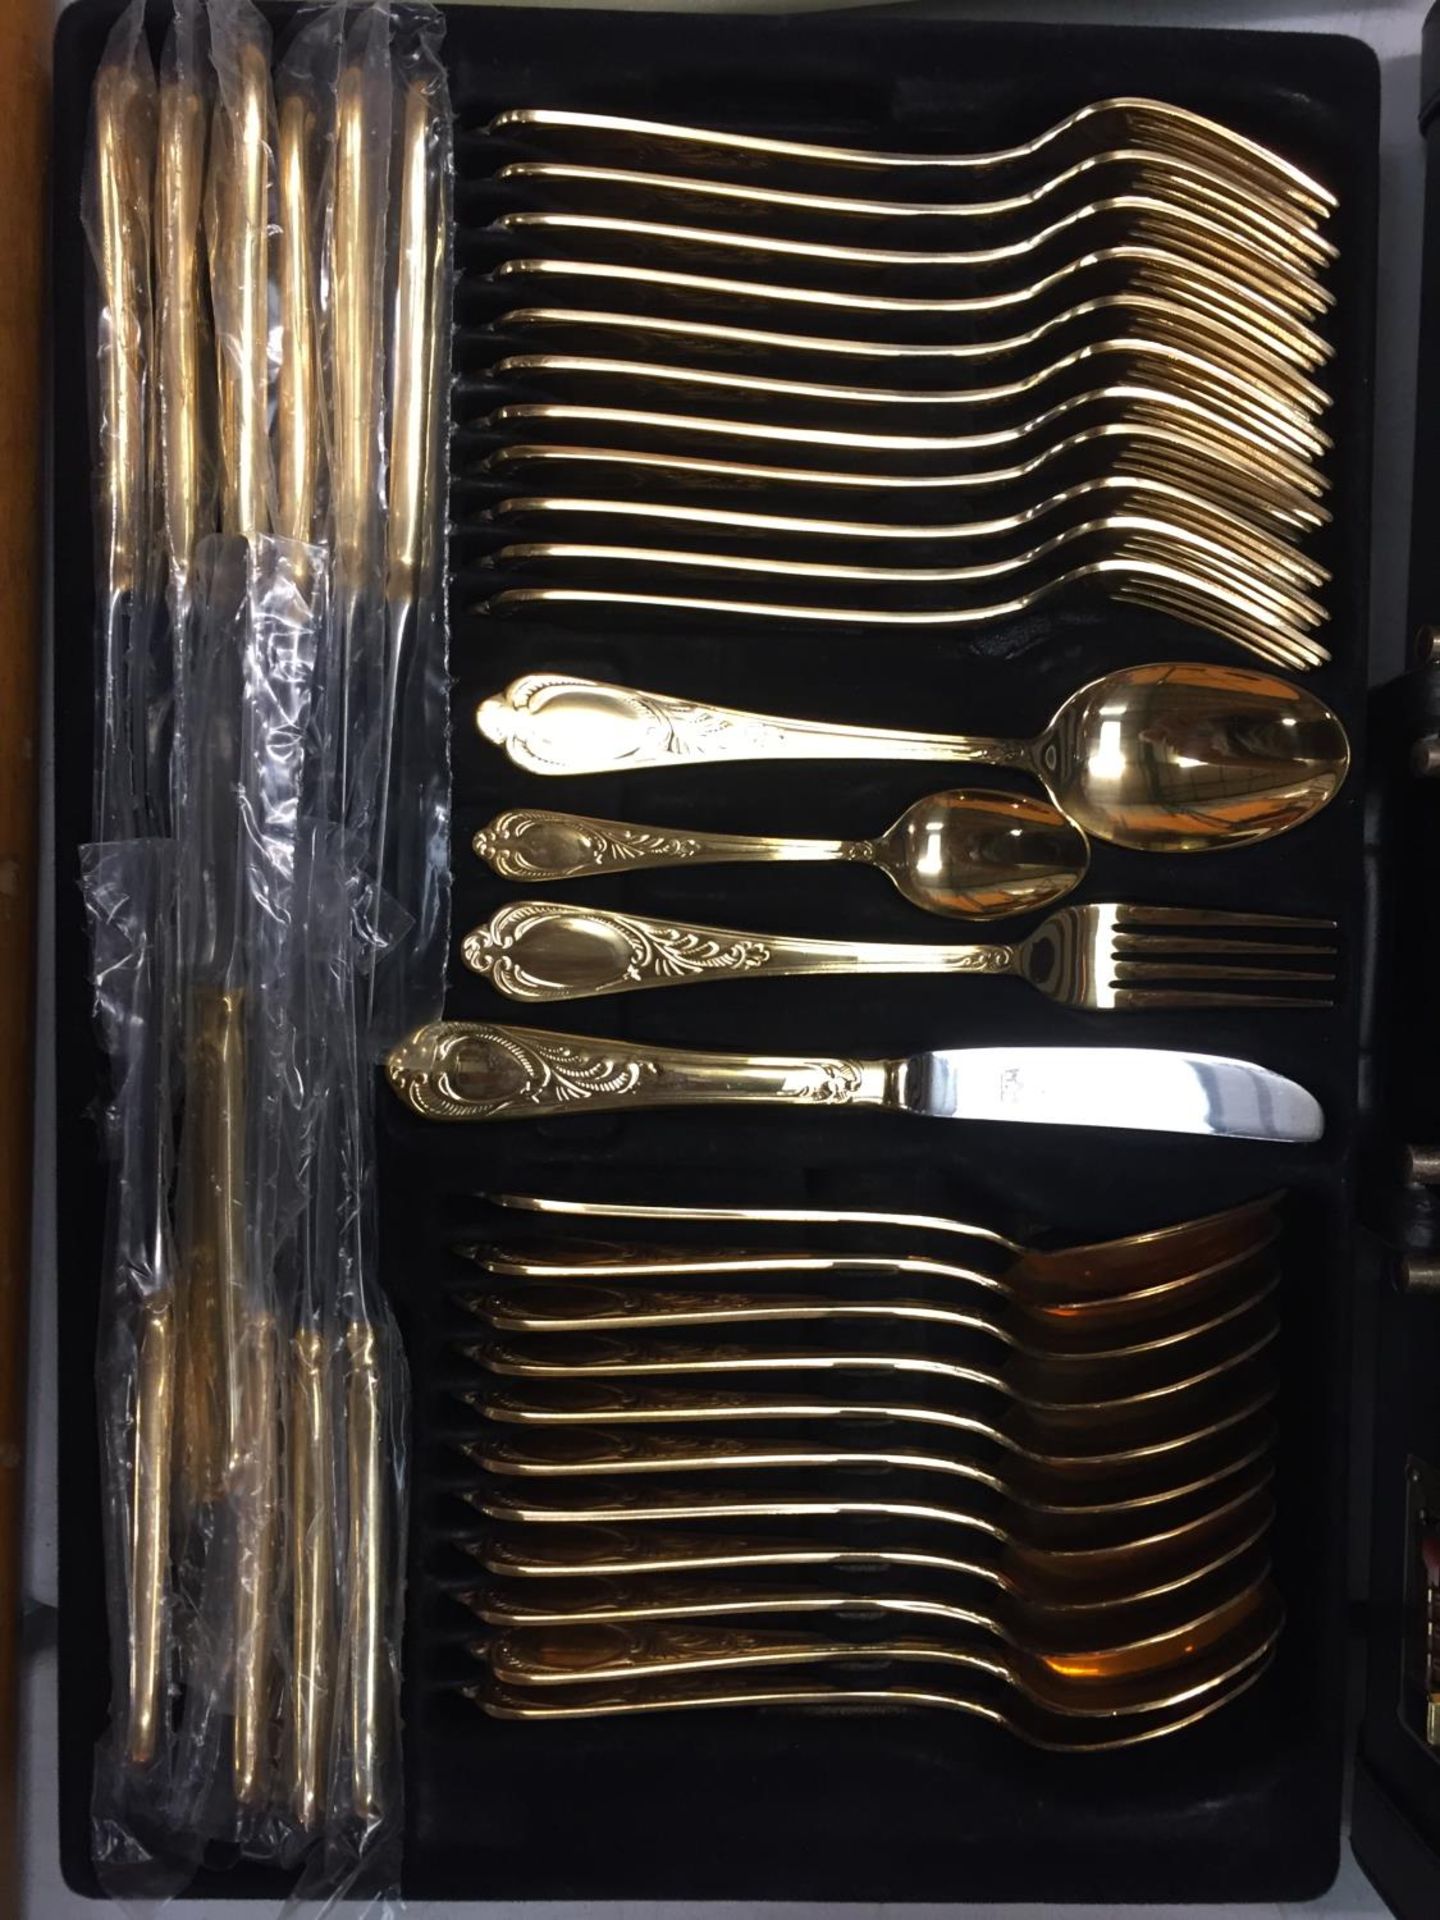 A TWELVE SETTING GOLD PLATED CANTEEN OF CUTLERY WITH SERVING SPOONS,LADELS, CAKE FORKS ETC IN A CASE - Image 2 of 5